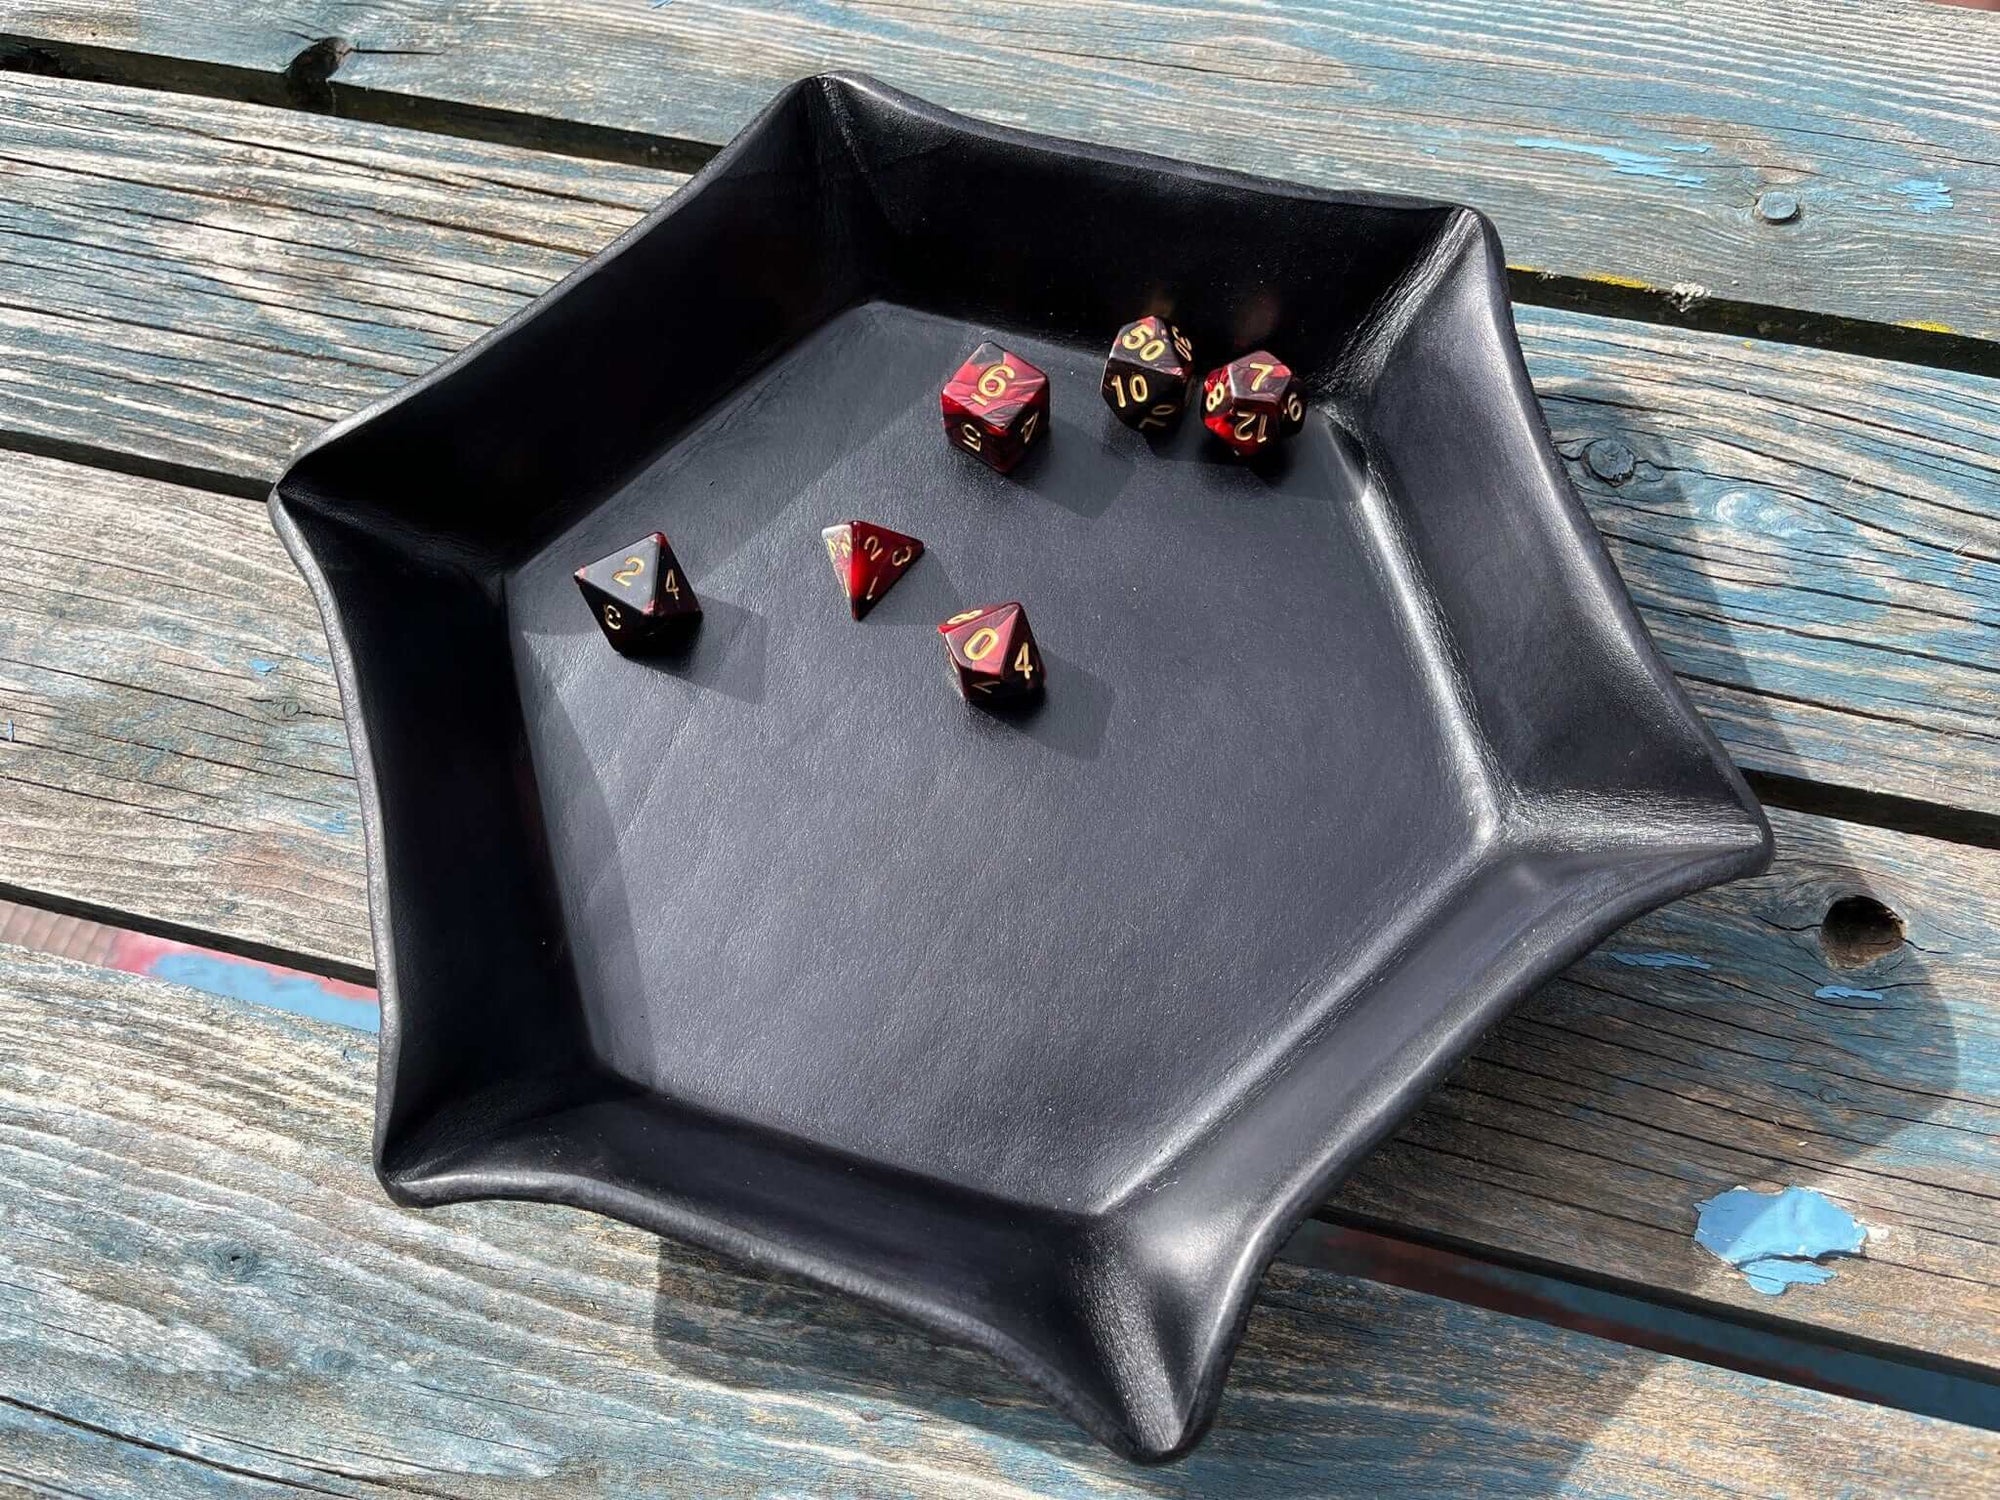 Handcrafted black leather dice tray. Hexagonal